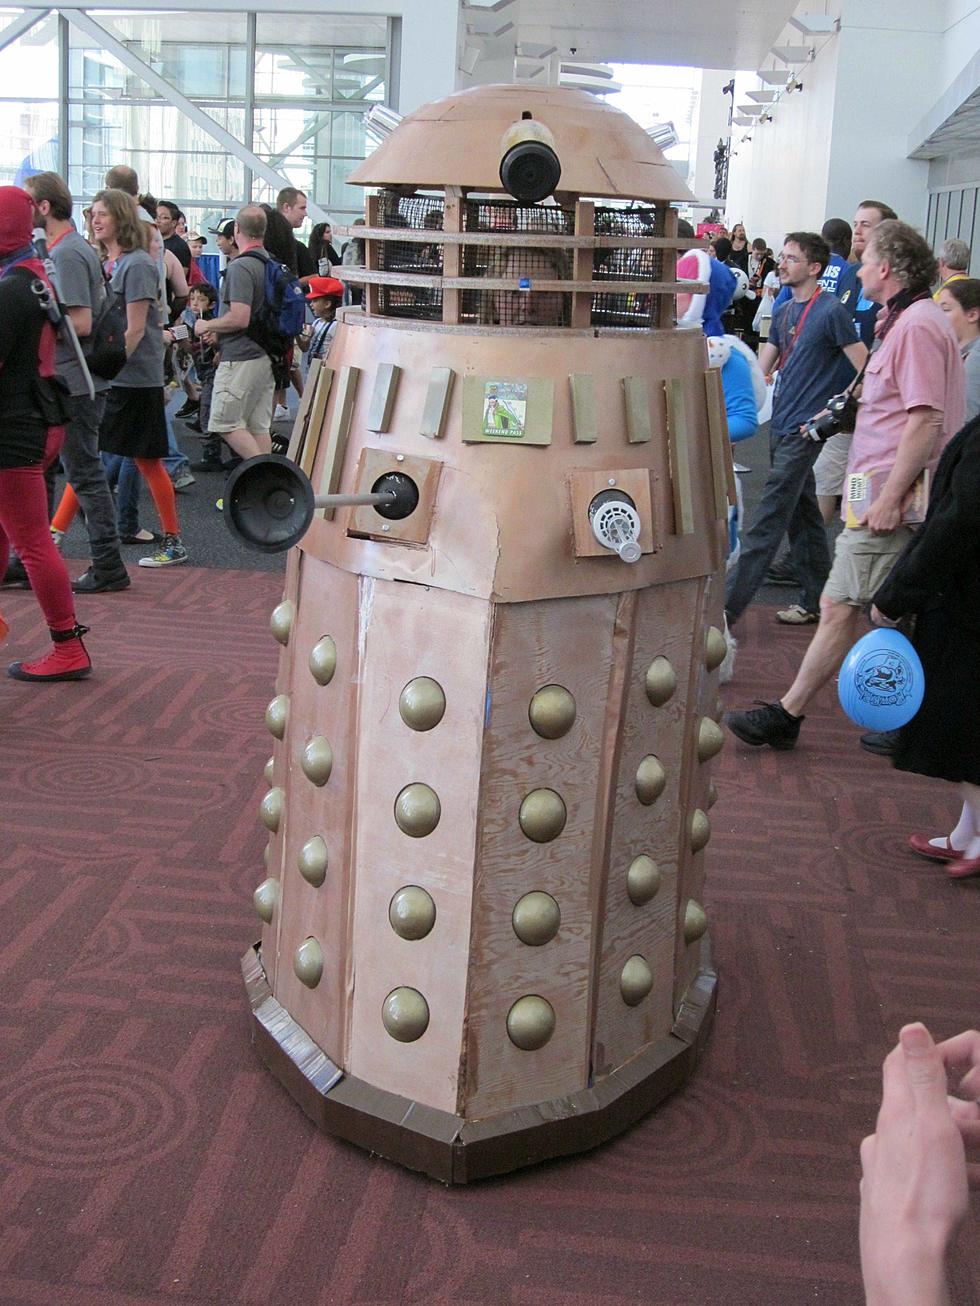 Doctor Who Cosplay Costumes – Denver Comic Con 2013